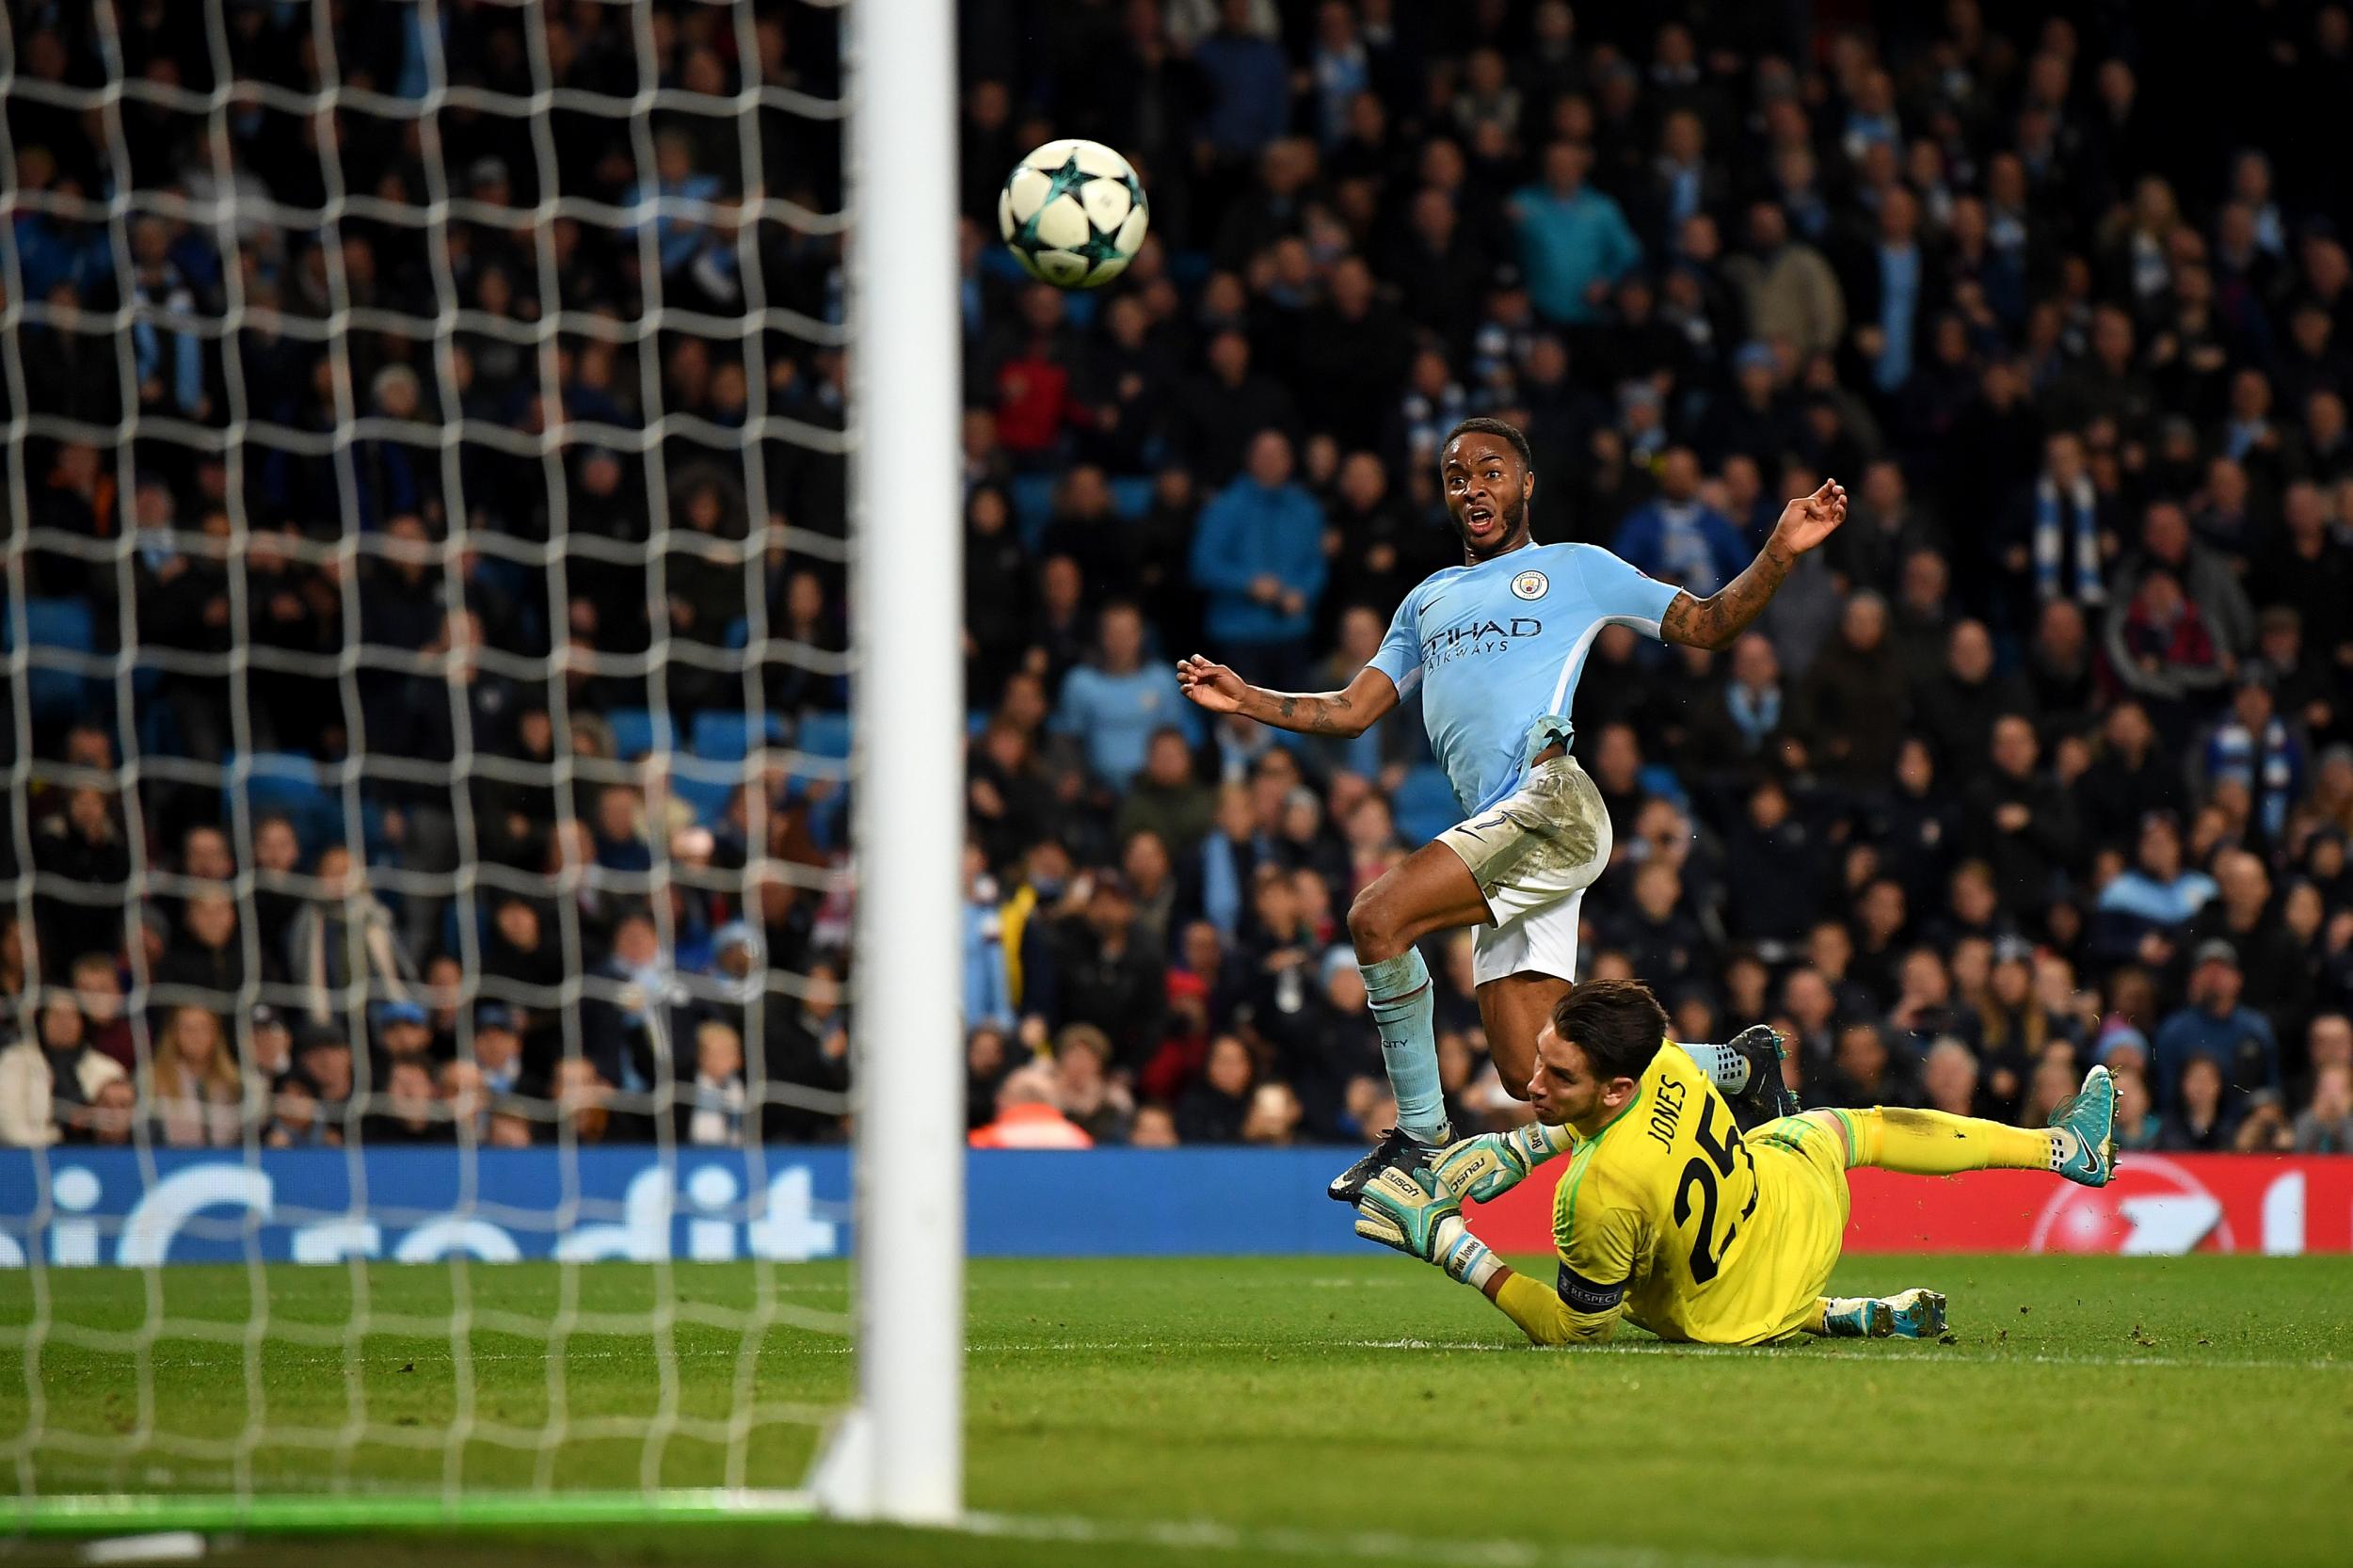 Sterling's late goal was crucial and not just in securing victory on the night